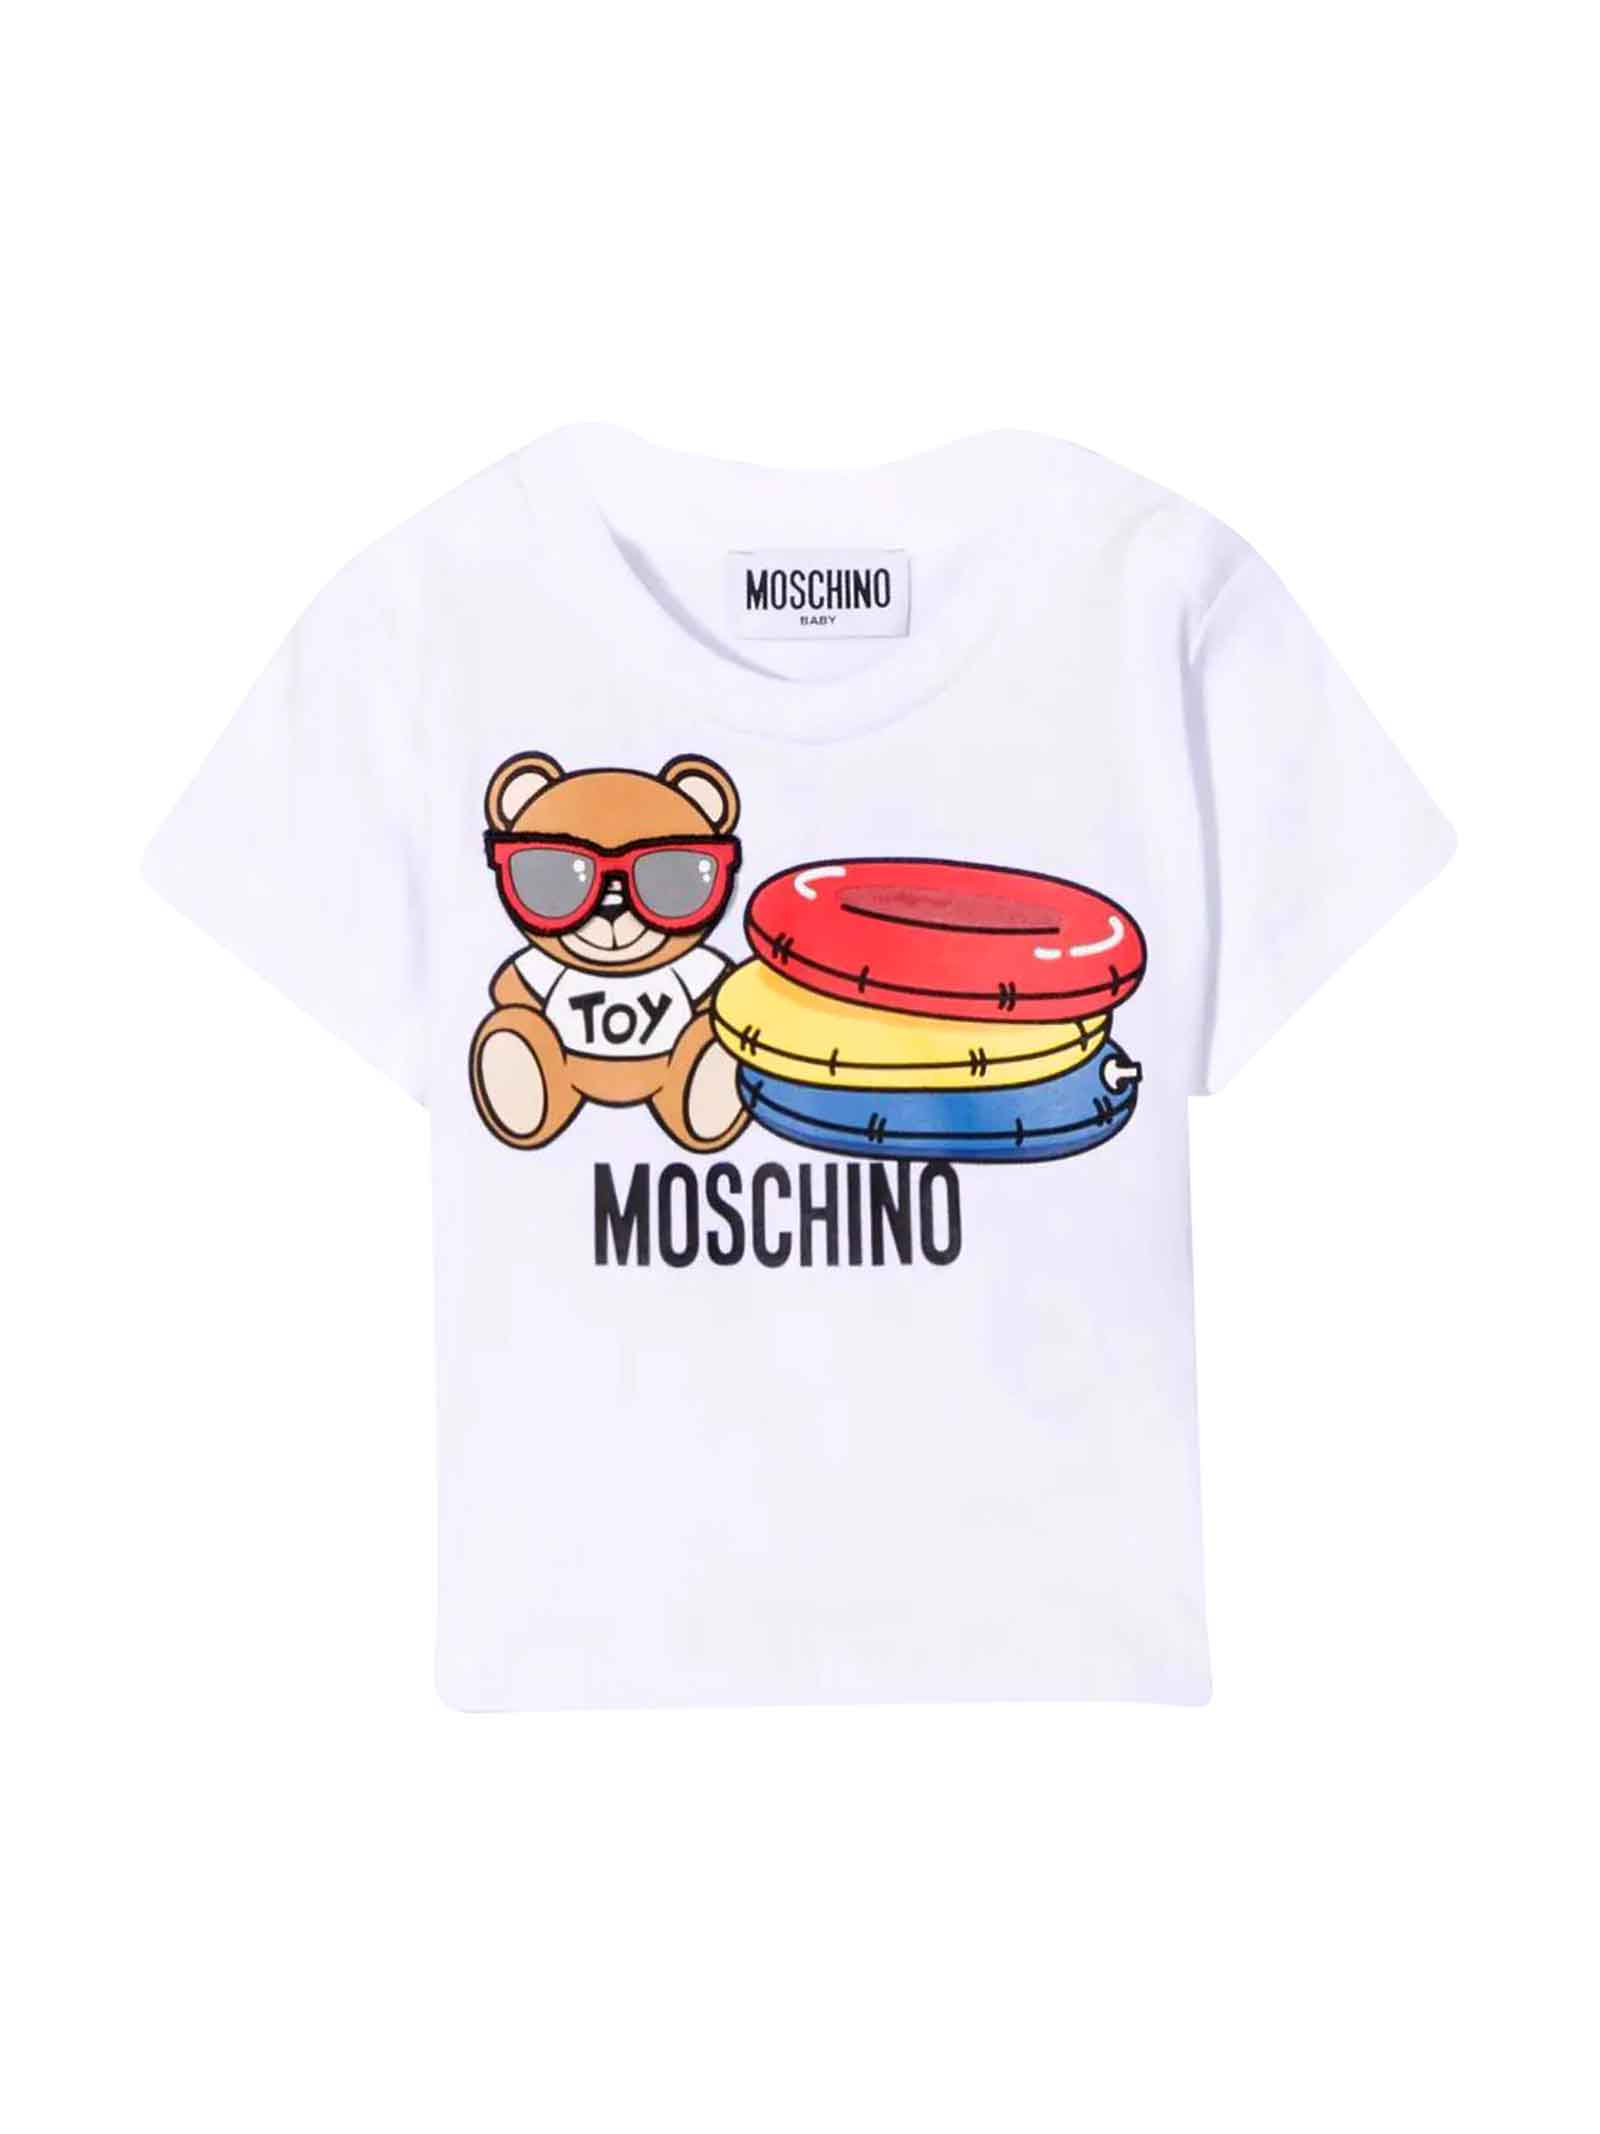 Moschino White Newborn T-shirt With Teddy Bear Print On The Front, Crew Neck, Short Sleeves And Straight Hem By.